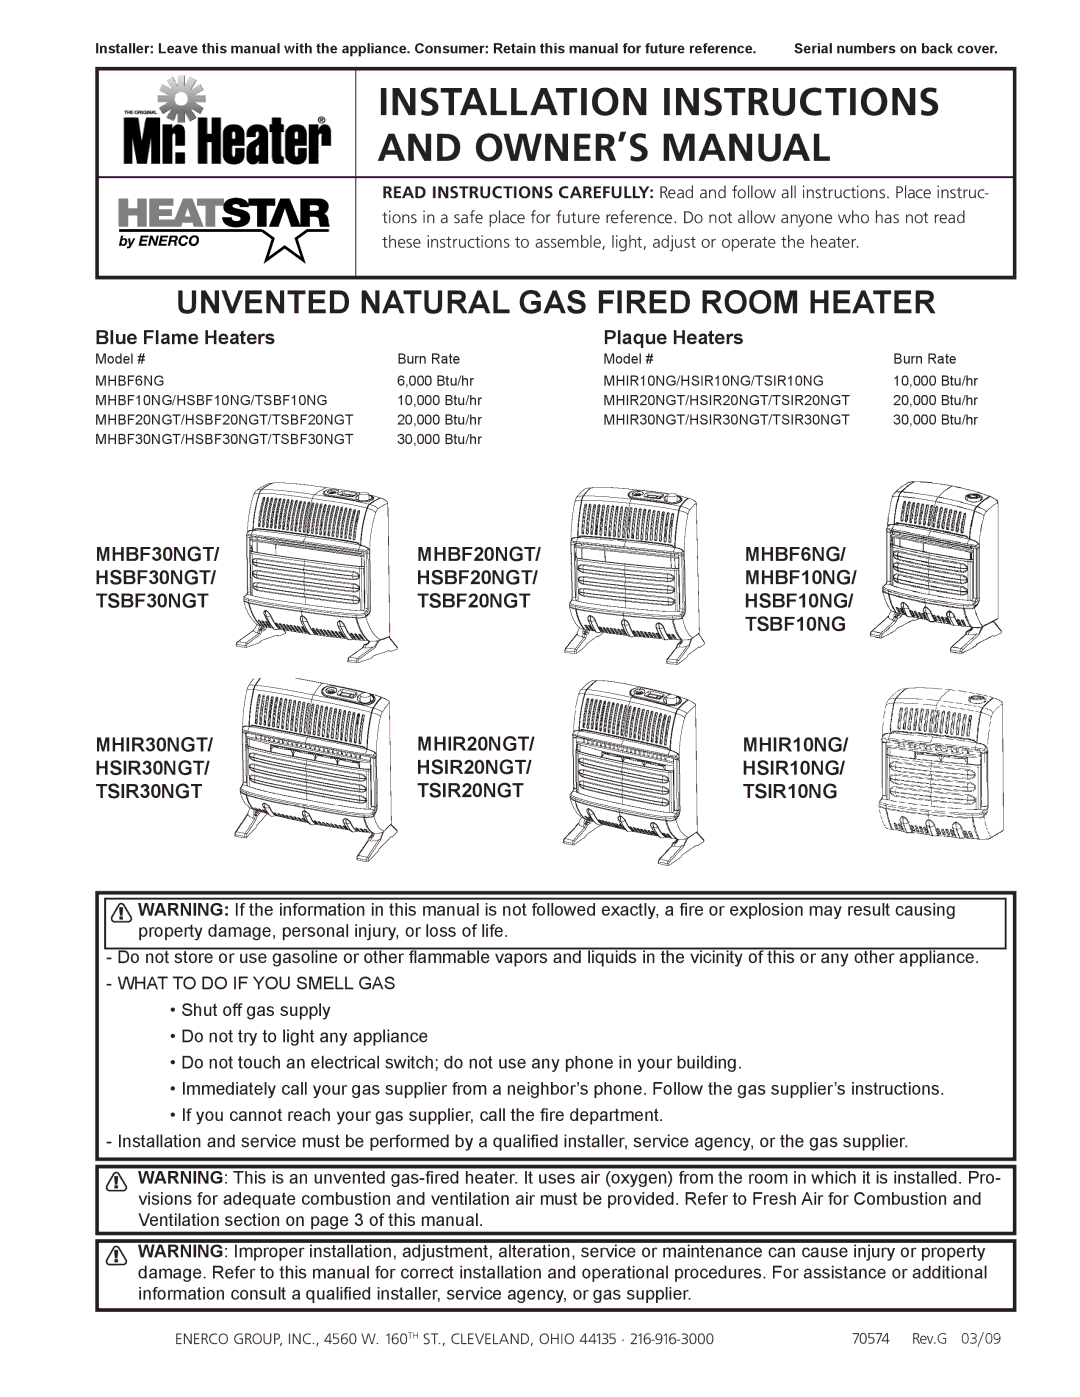 Enerco TSBF10NG, TSIR20NGT, MHIR20NGT installation instructions Blue Flame Heaters Plaque Heaters, MHBF30NGT MHBF20NGT 